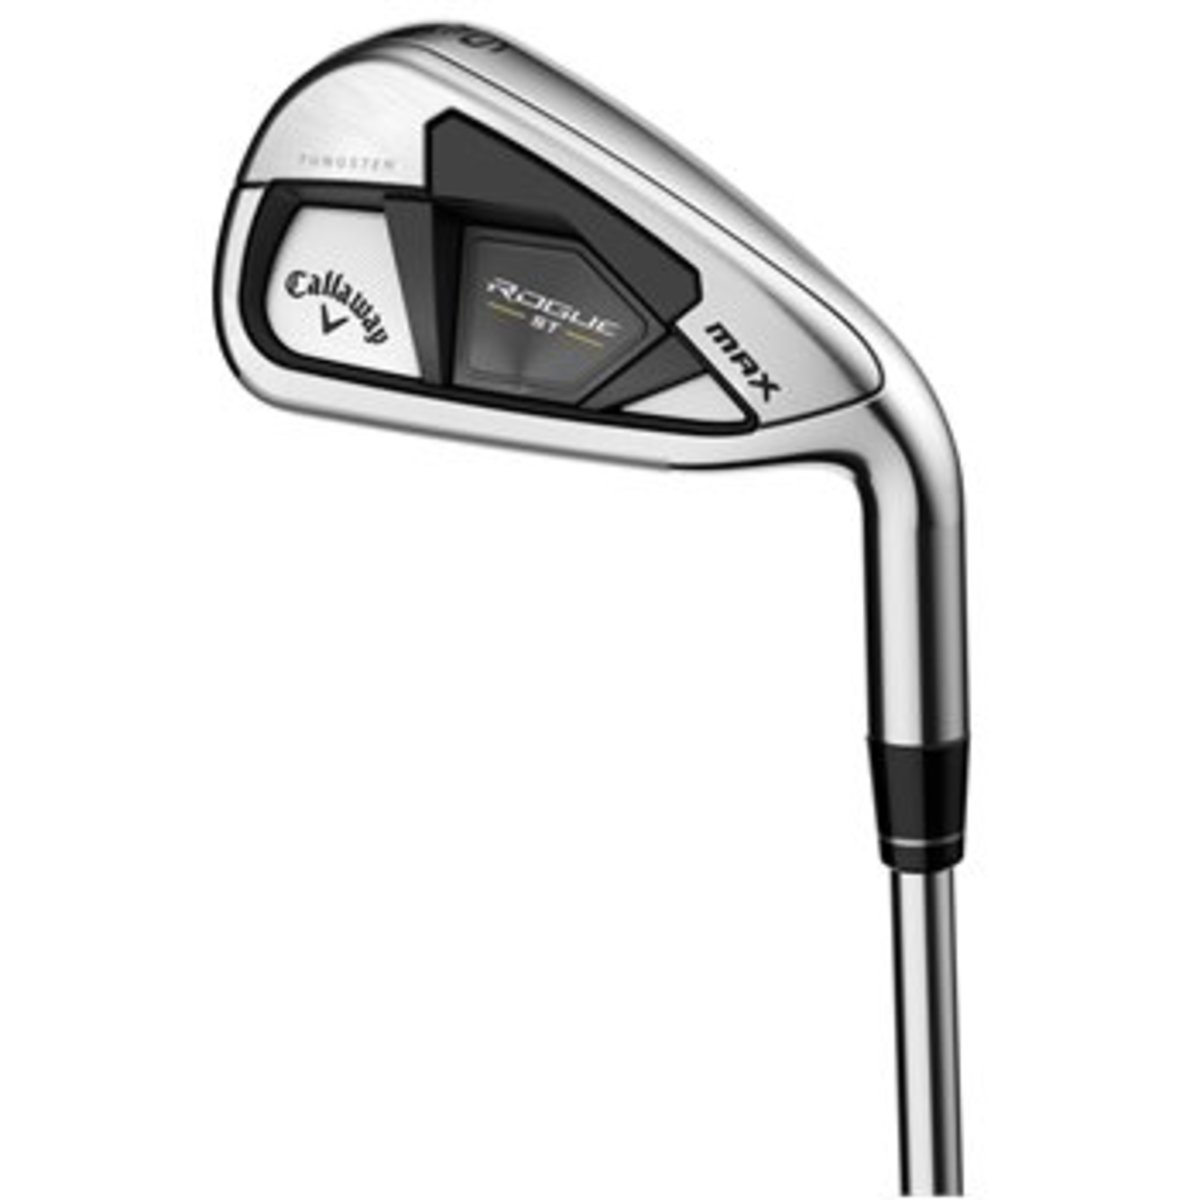 Shop Callaway Rogue ST MAX irons on Morning Read's online pro shop, powered by GlobalGolf.